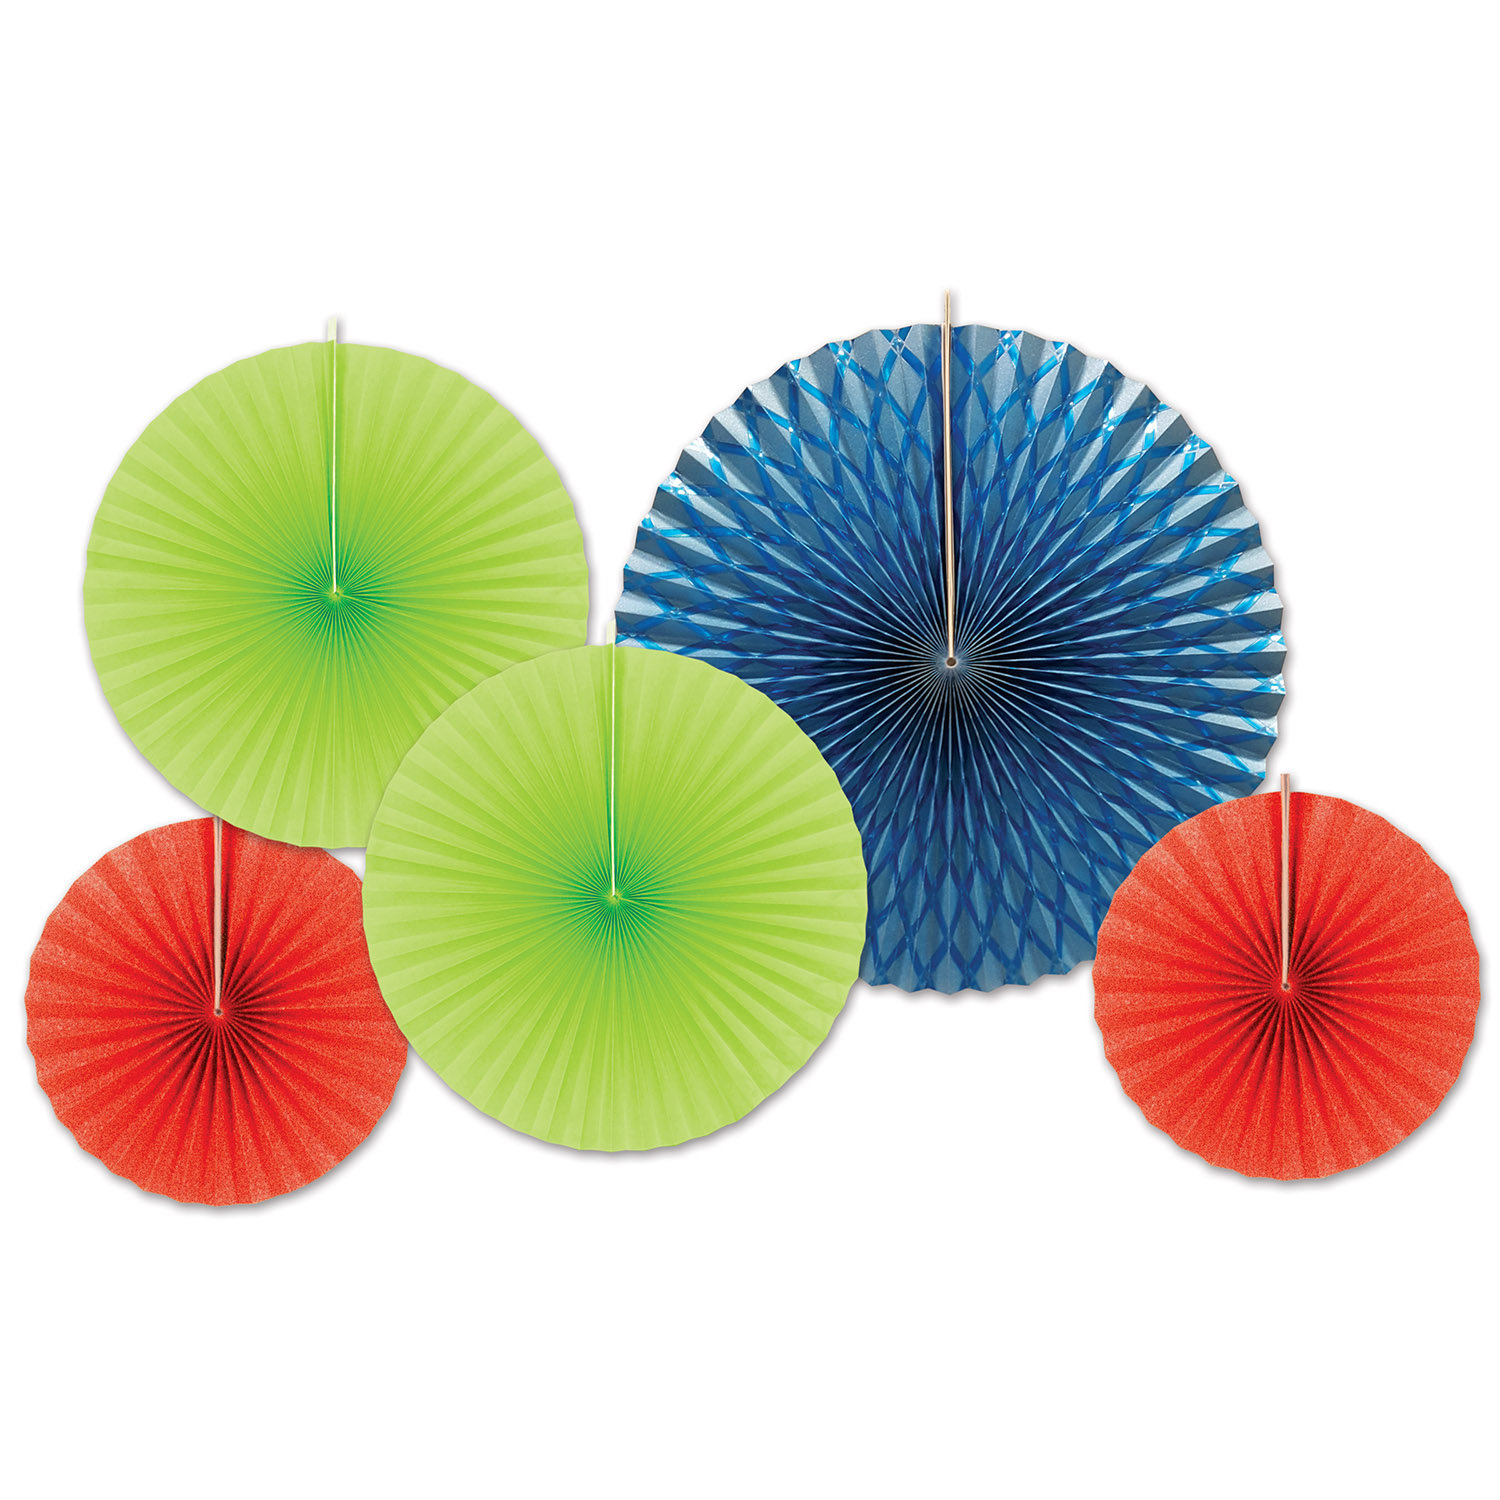 Assorted sized paper and foil fans in blue, green, and red. 